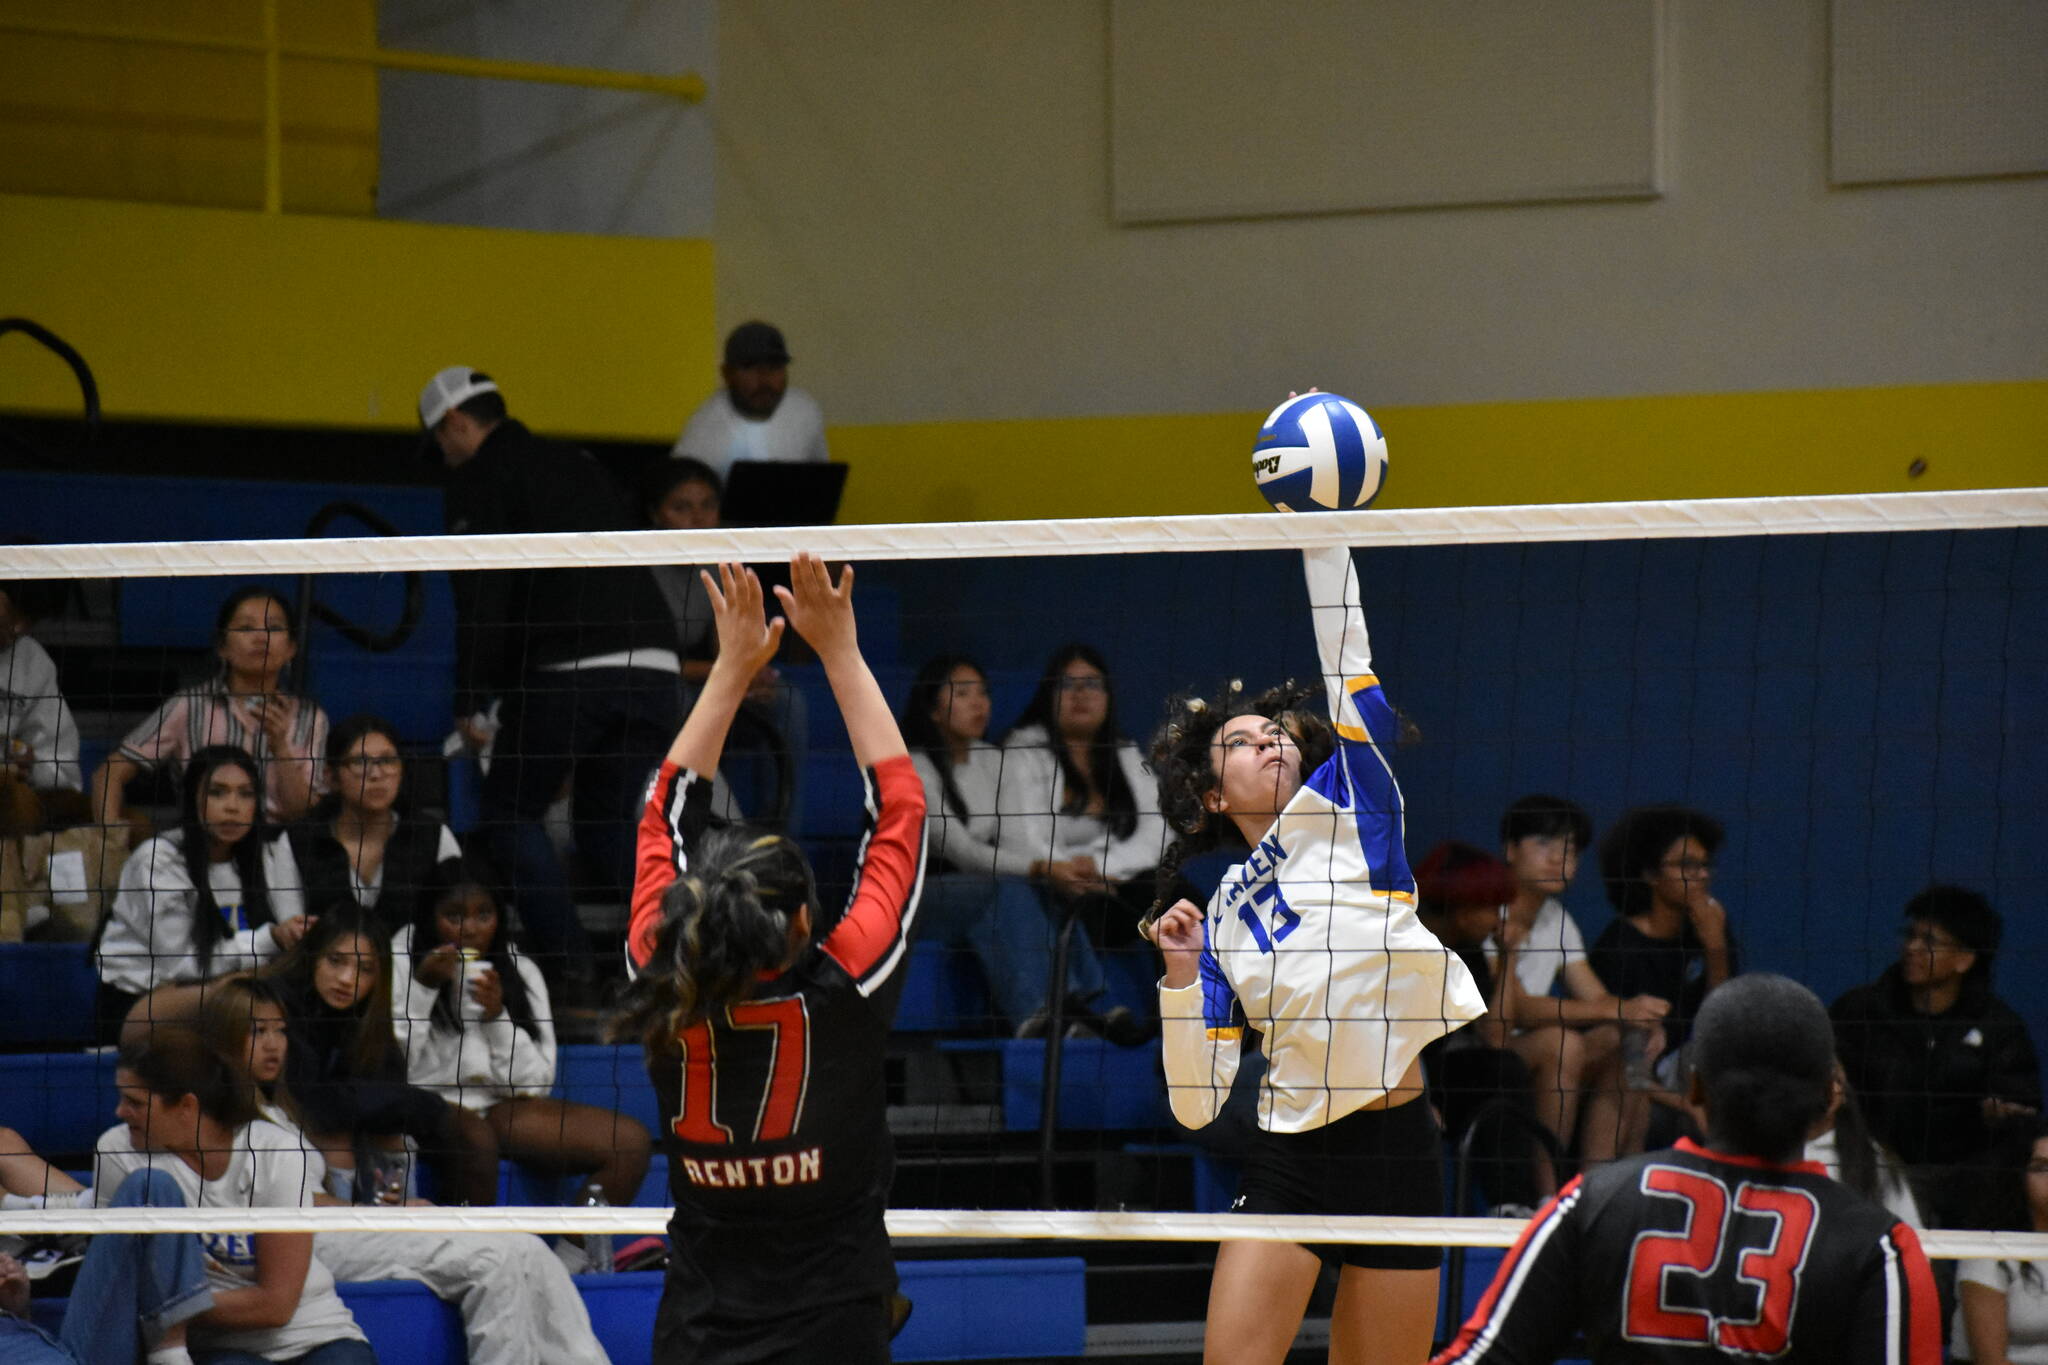 Noelani Kaiwi goes for a kill in against Renton. Ben Ray/ The Reporter